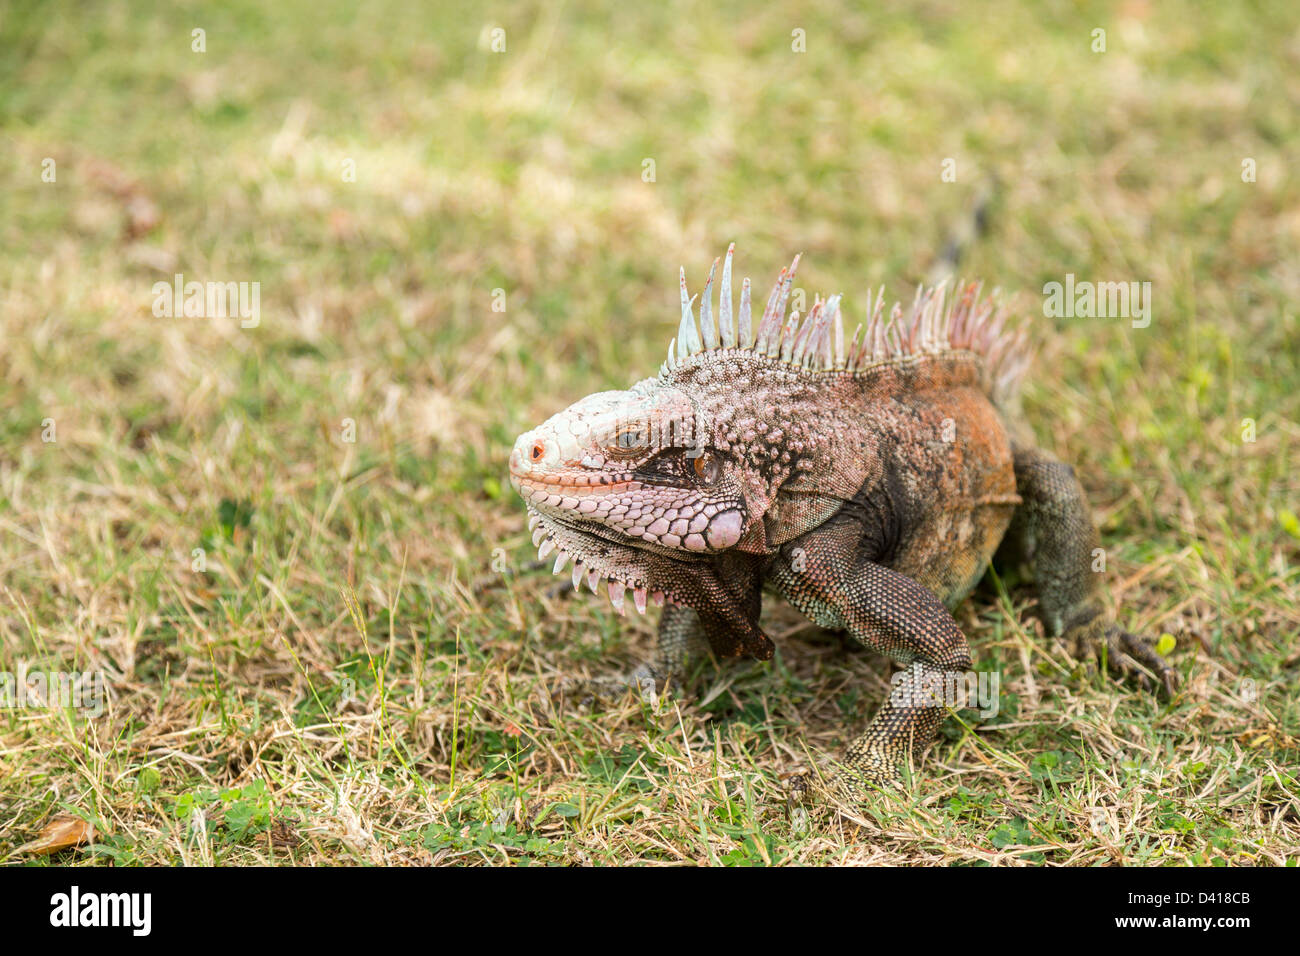 Close up of head of Iguana on lawn grass in island of St Thomas Stock Photo